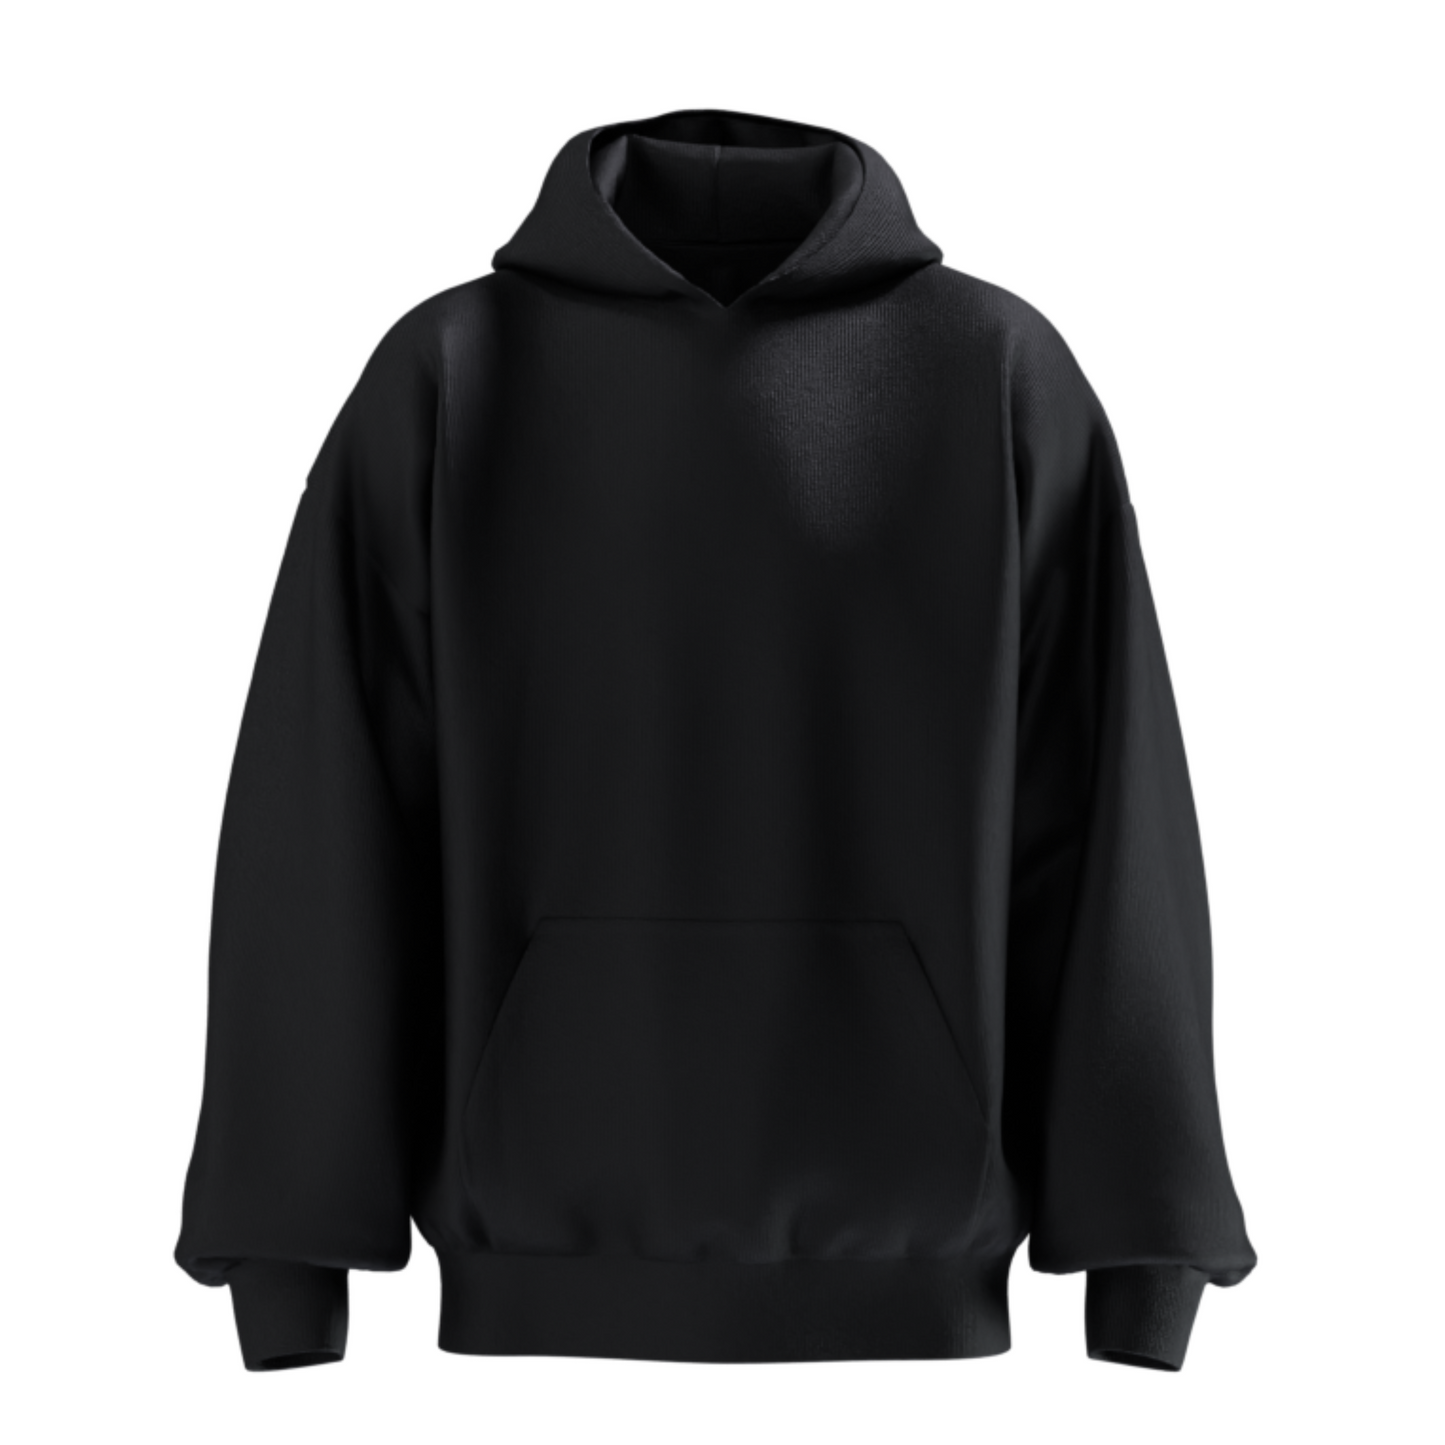 HYPExSTORE® NOT A FAN OVERSIZED HOODIE 380 GSM